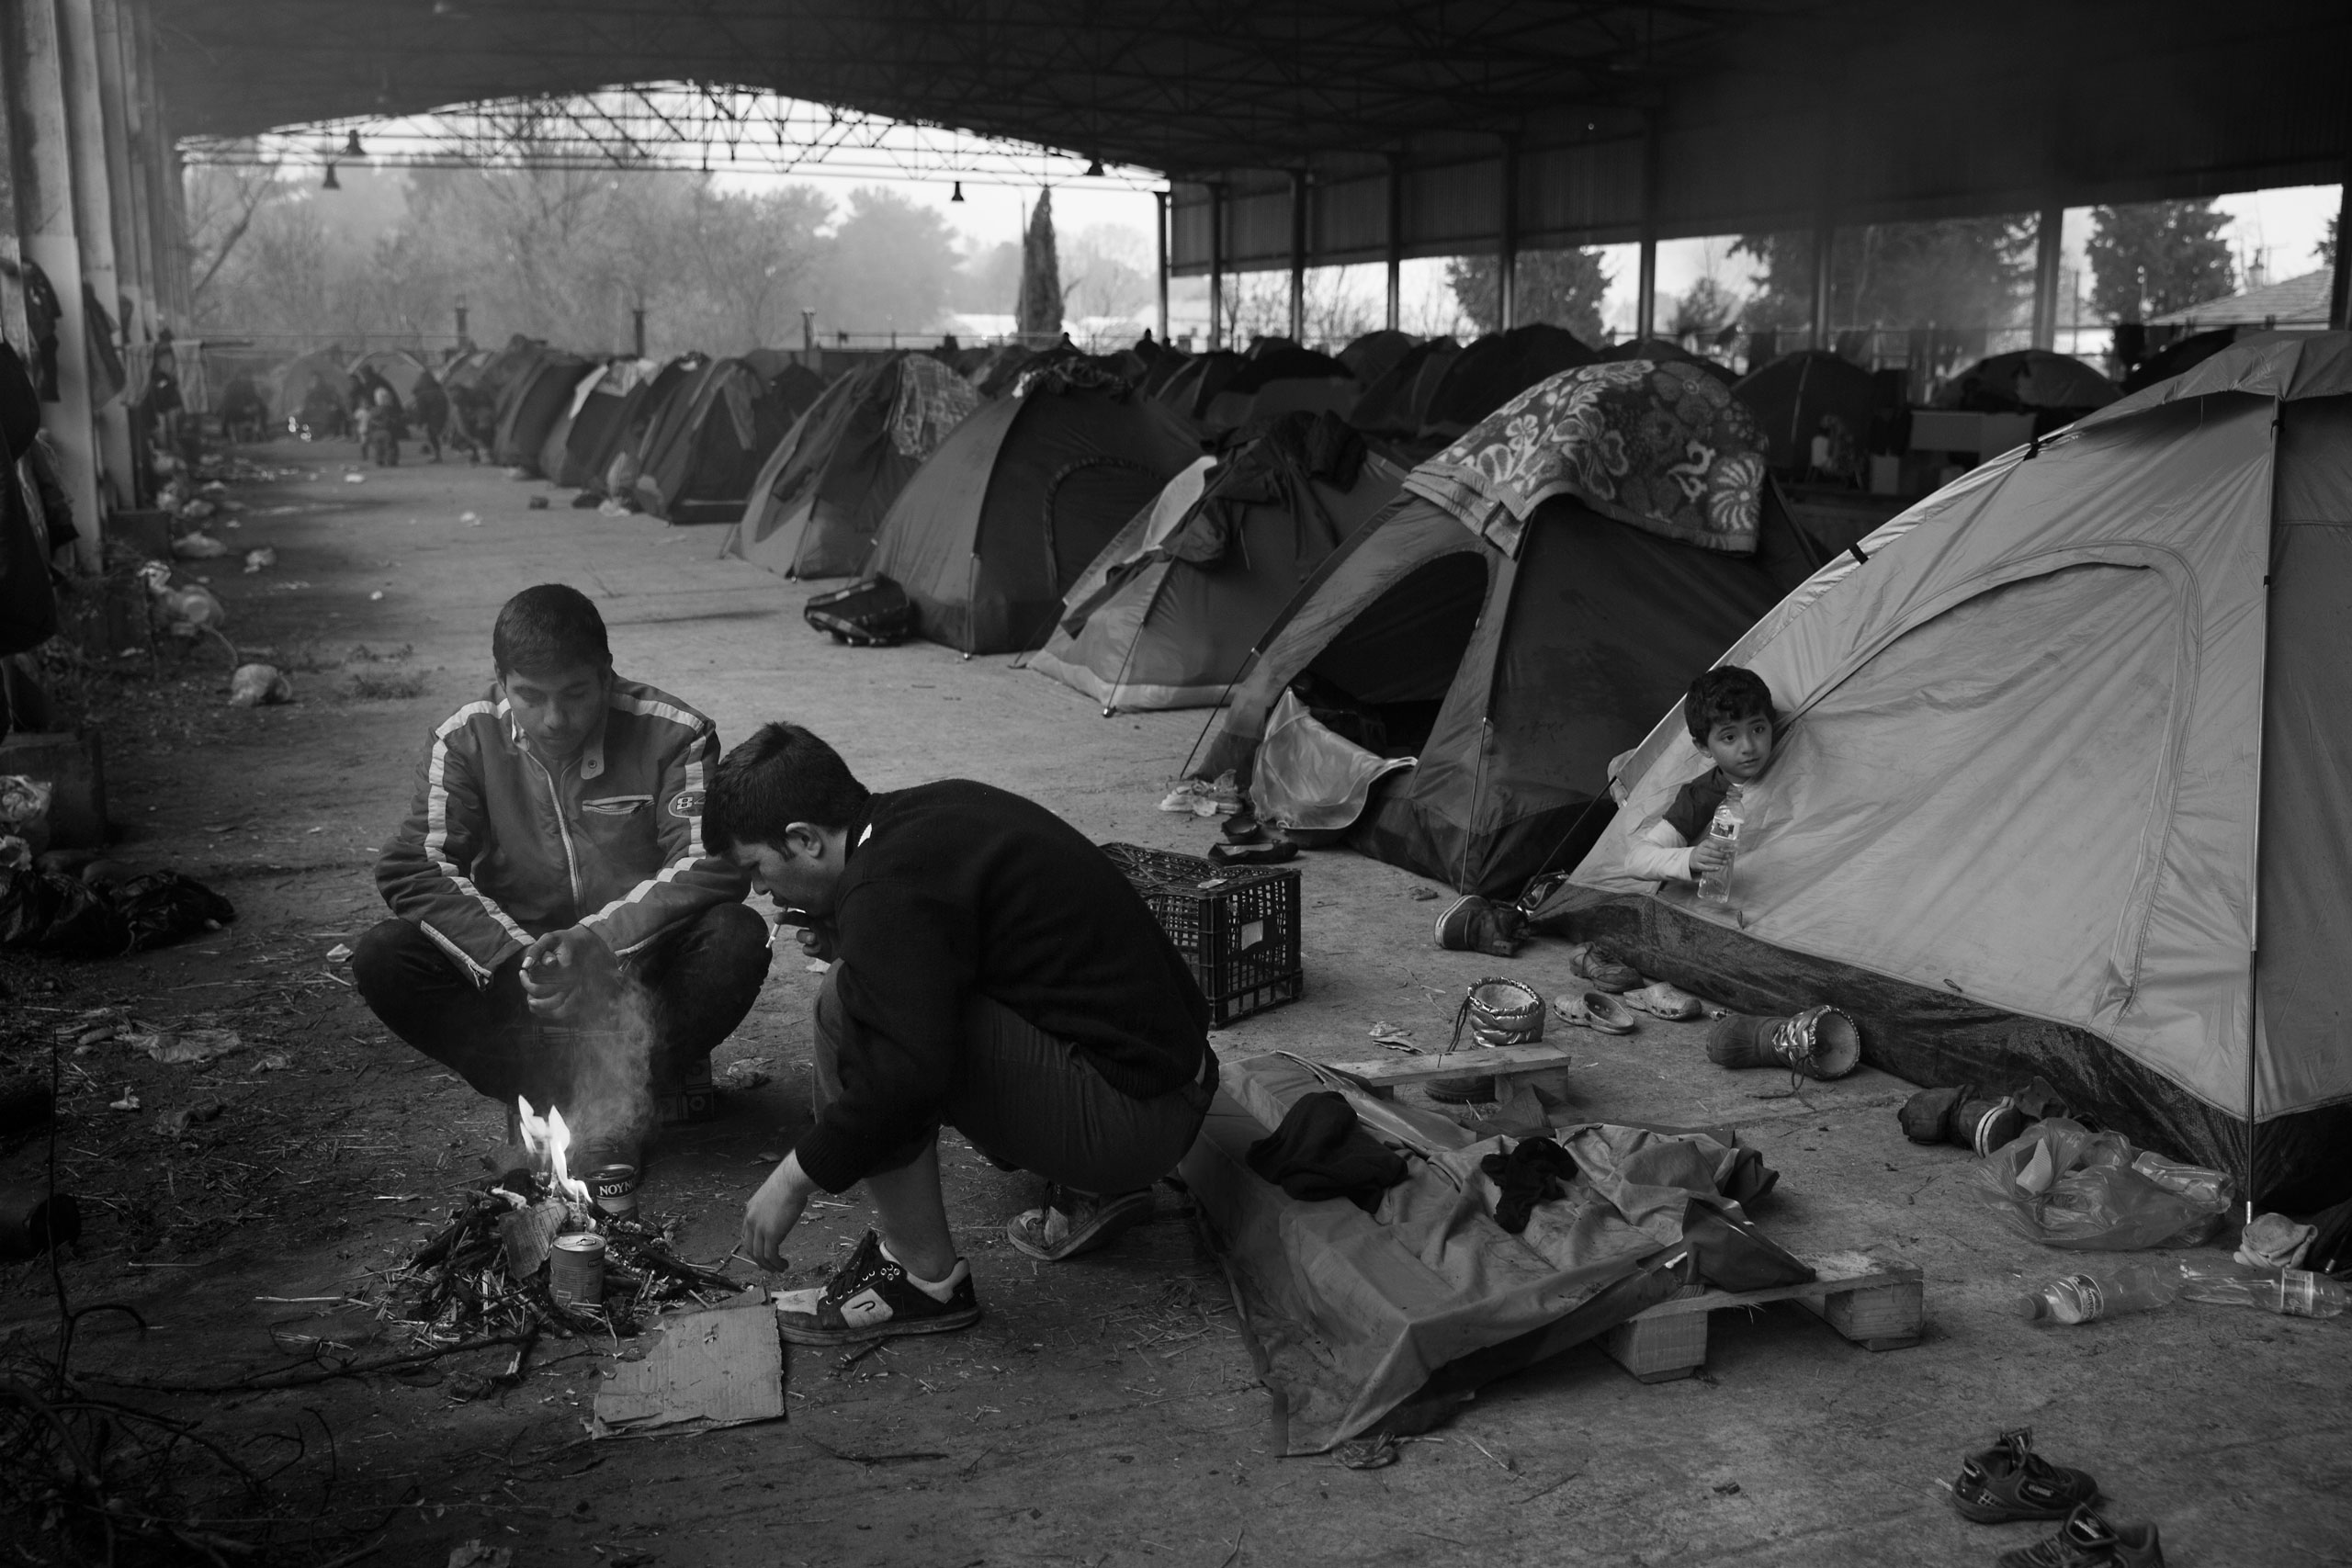 Tents line the inside of an old railway hangar near the town of Idomeni, Greece at the border with Macedonia. The refugees are being stopped from moving beyond Greece leaving thousands stranded in desperate conditions, March 13, 2016. (James Nachtwey for TIME)